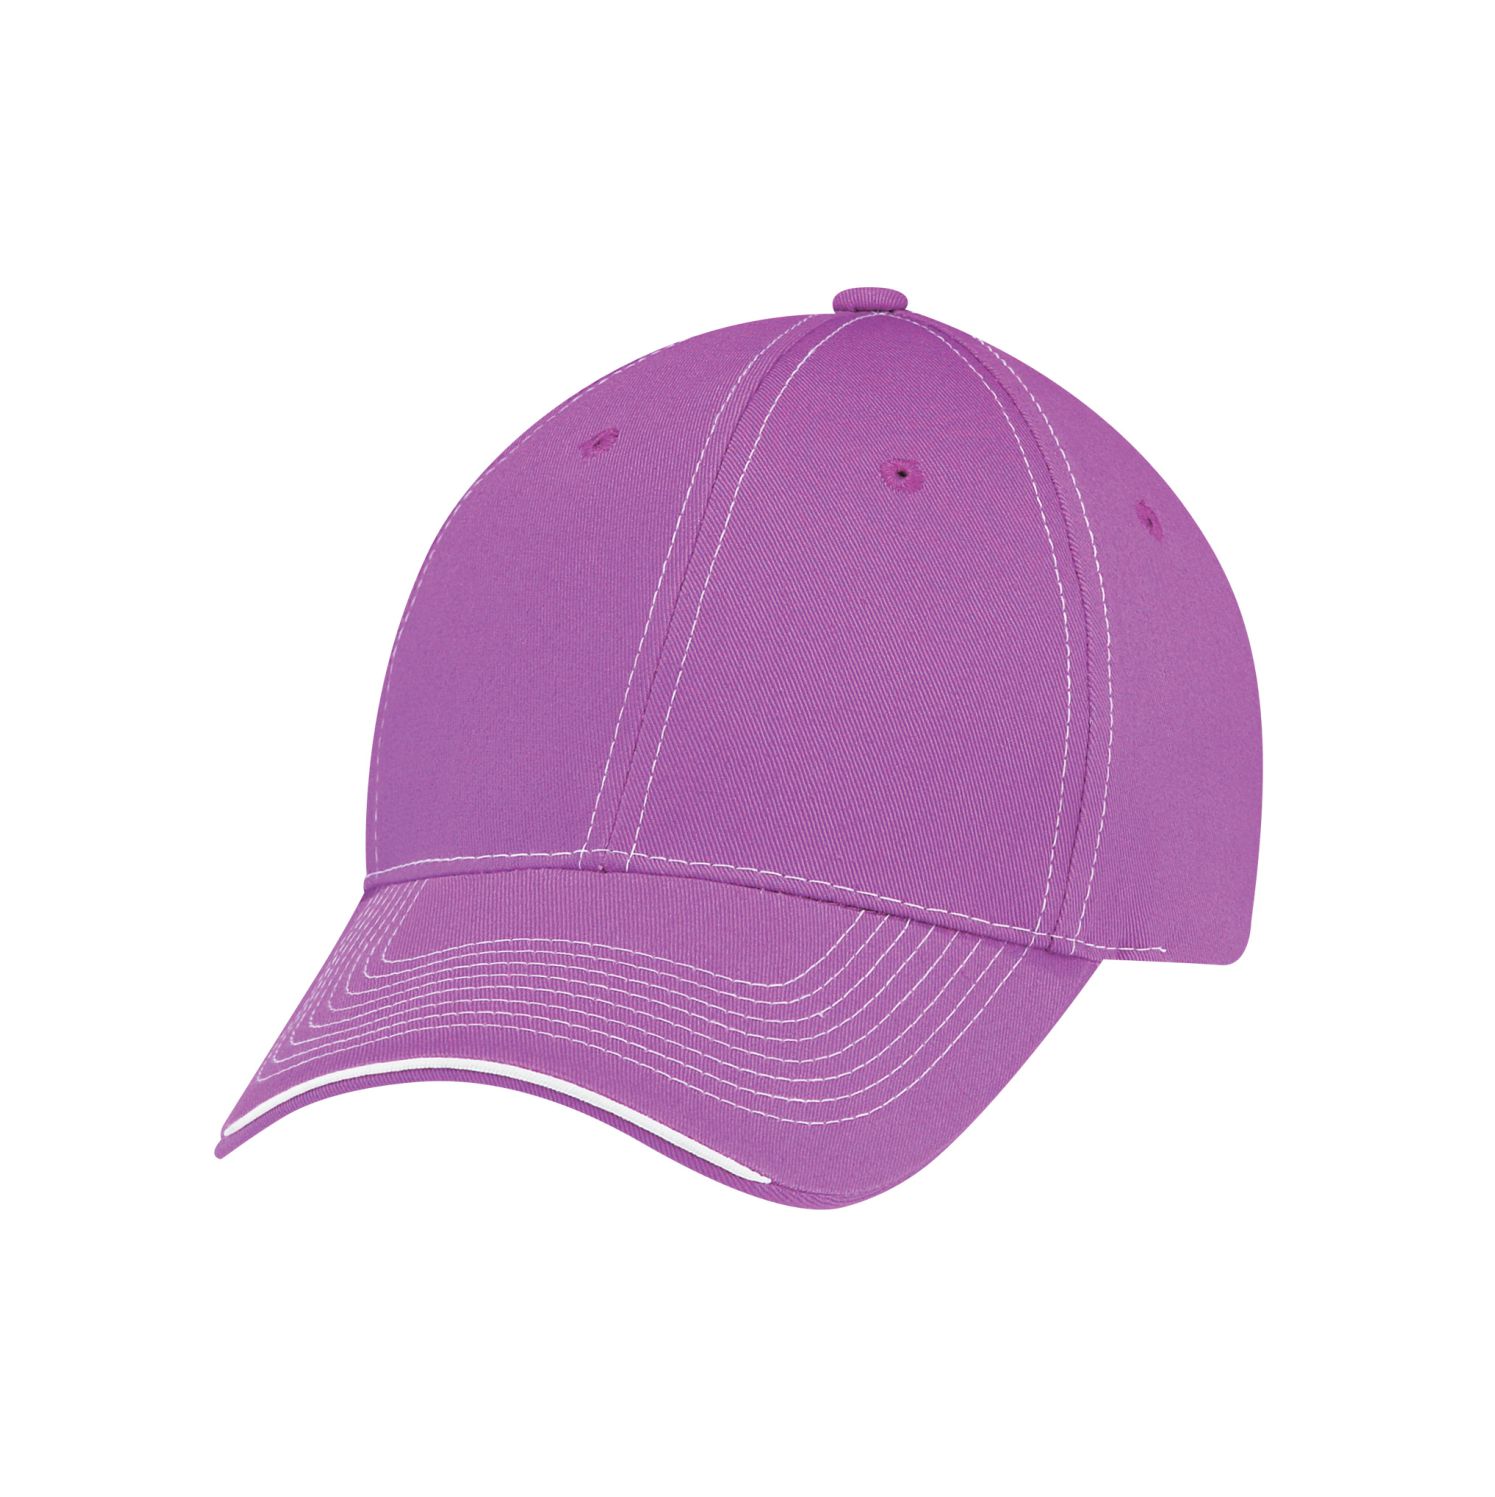 AJM 6-Panel Constructed Full-Fit Hat #6F617M Periwinkle / White